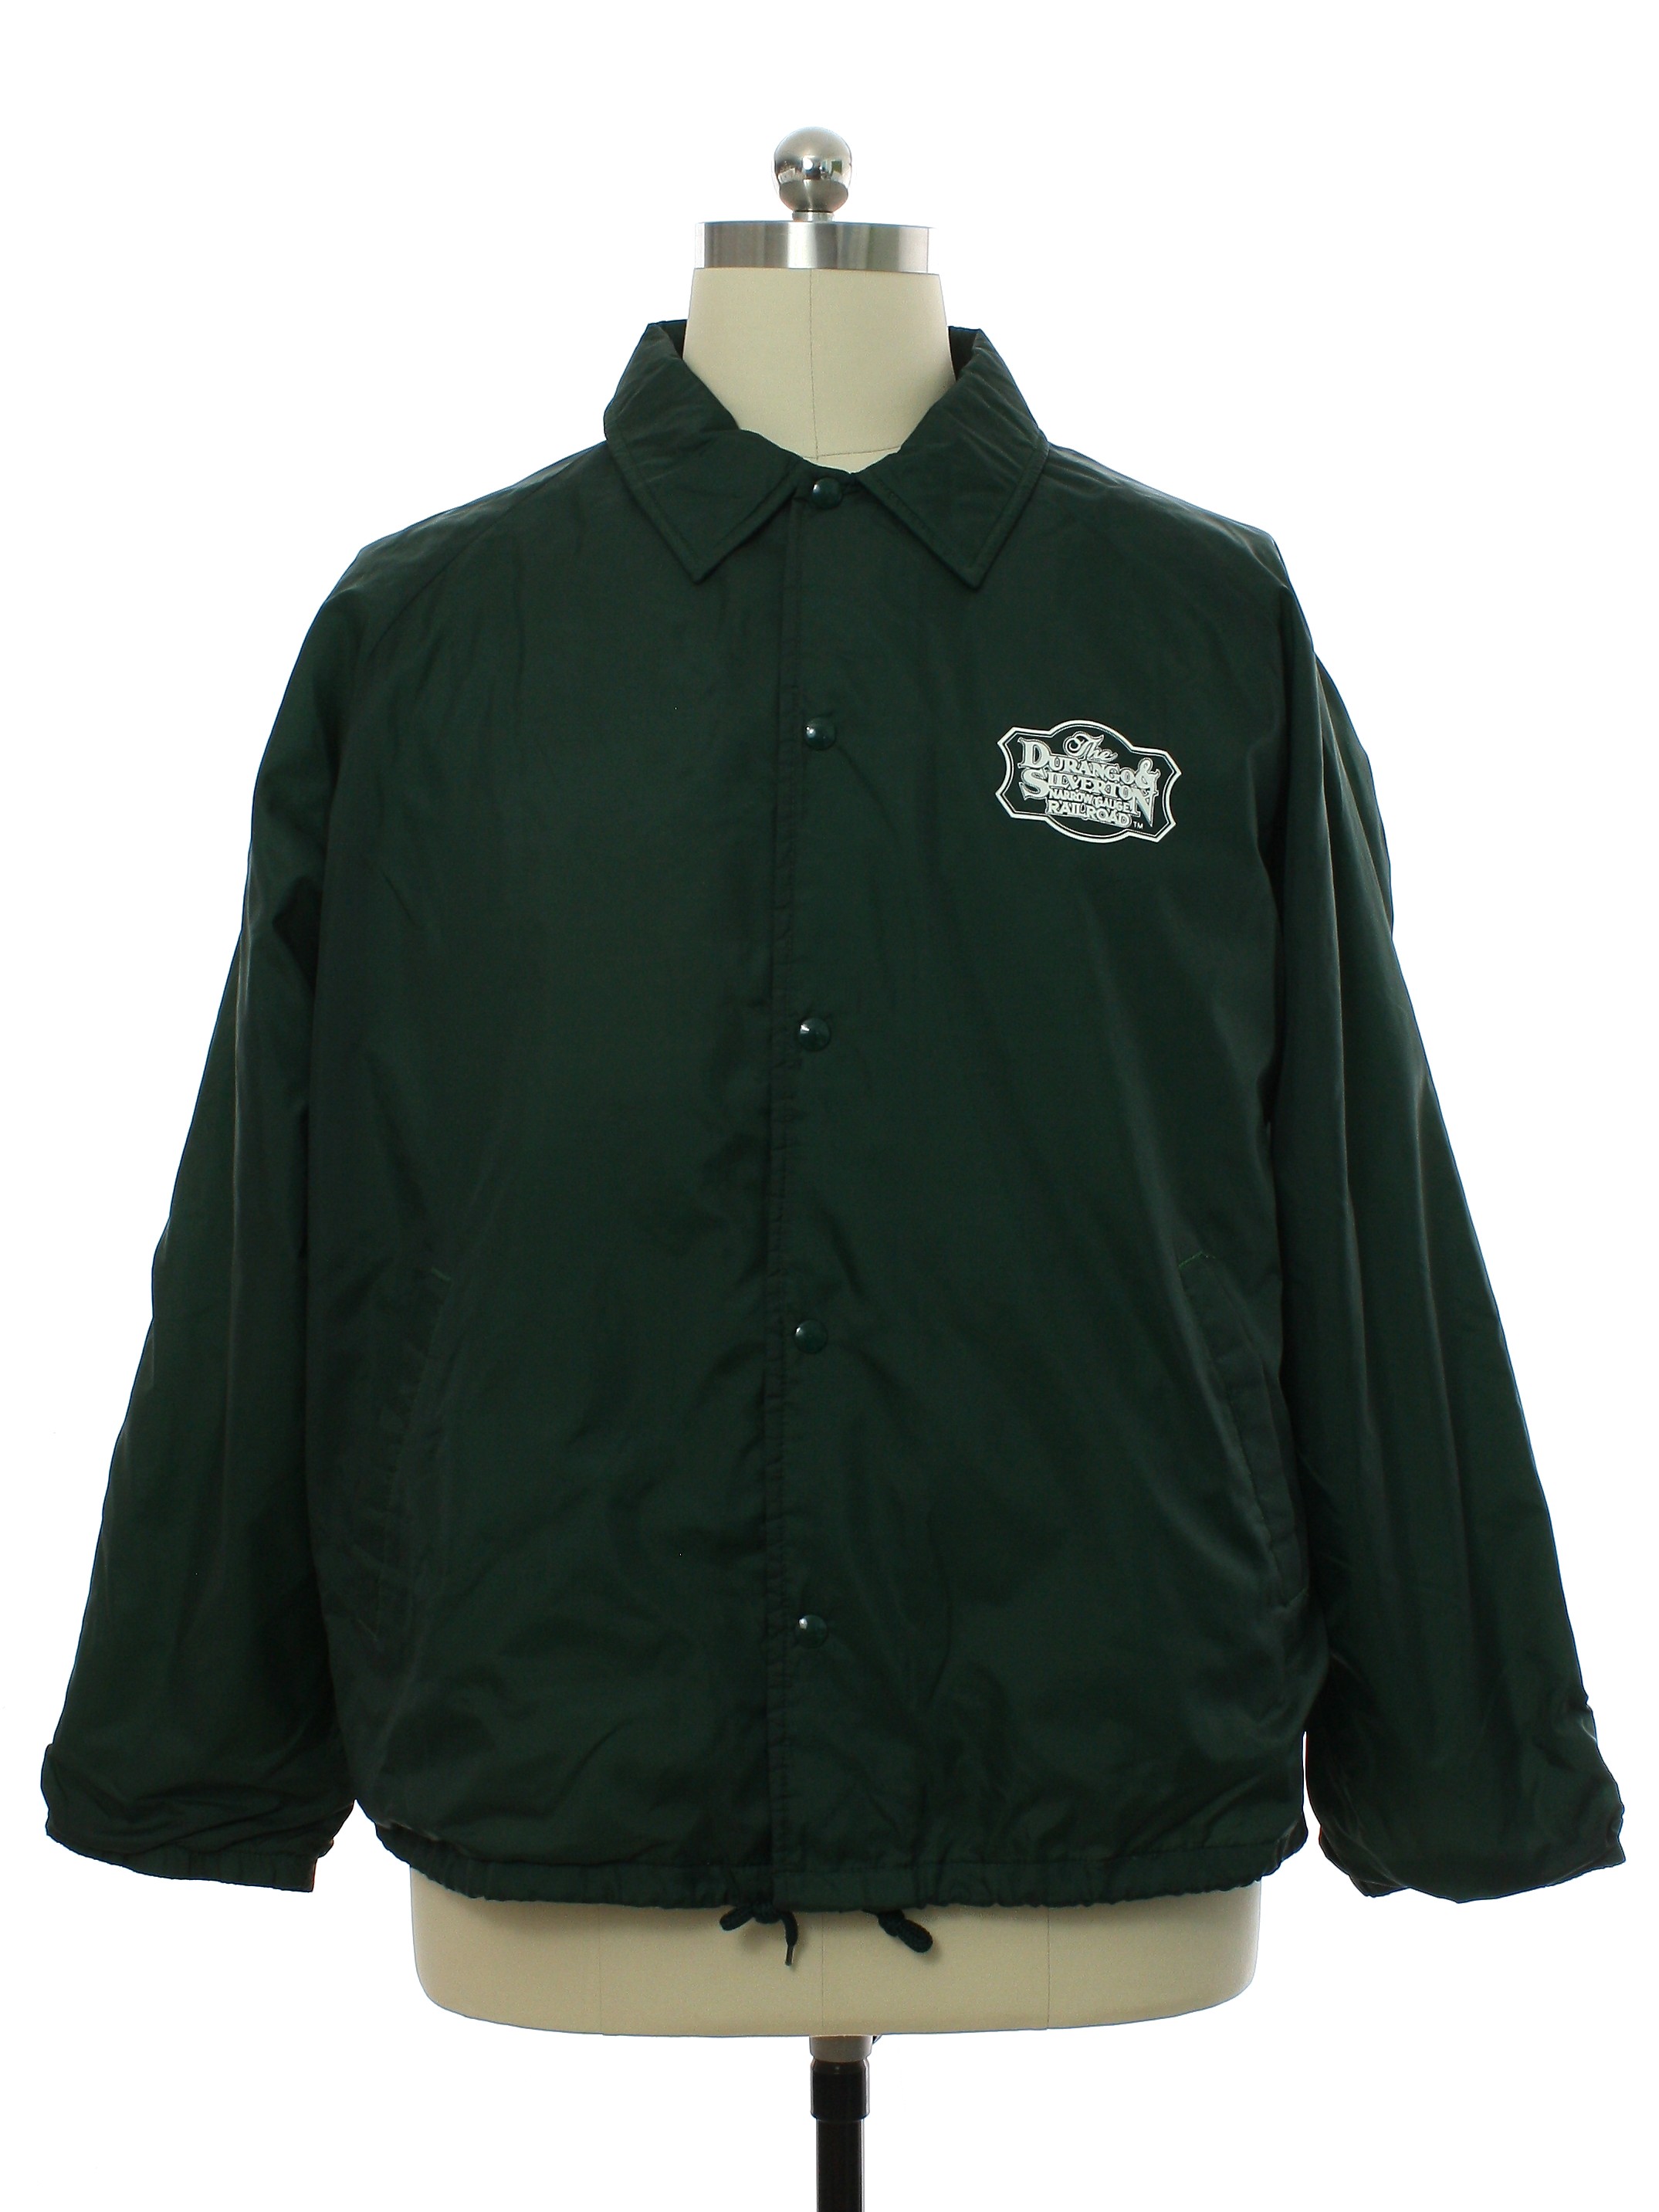 Retro 1990's Jacket (The Warm Up) : 90s -The Warm Up- Mens forest green ...